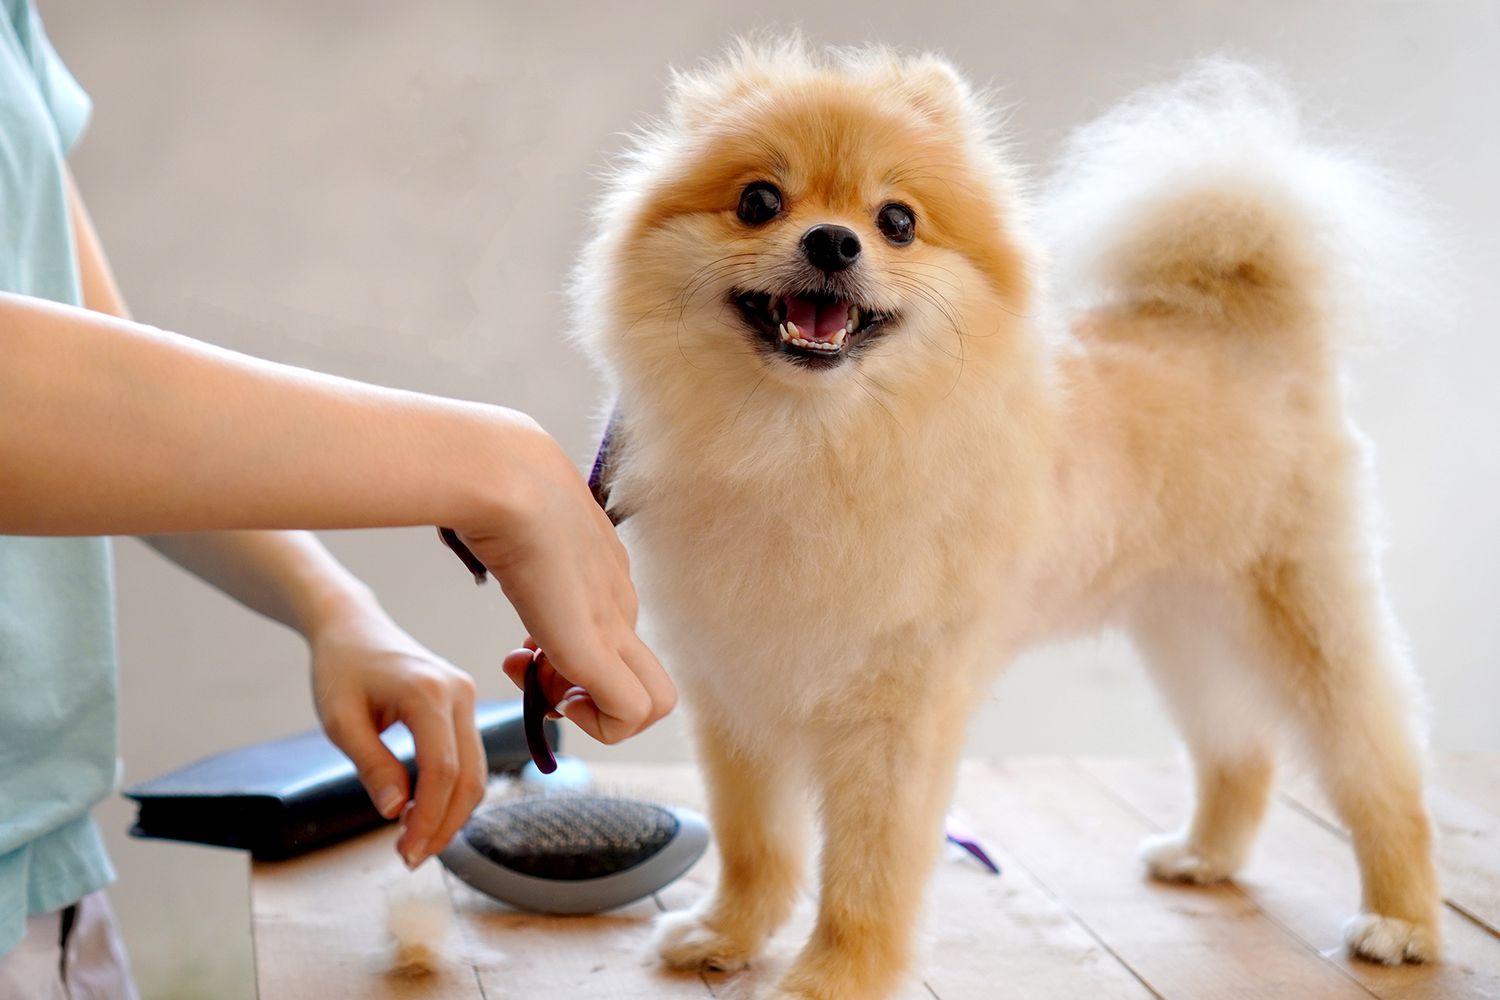 best dog clippers for pomeranians